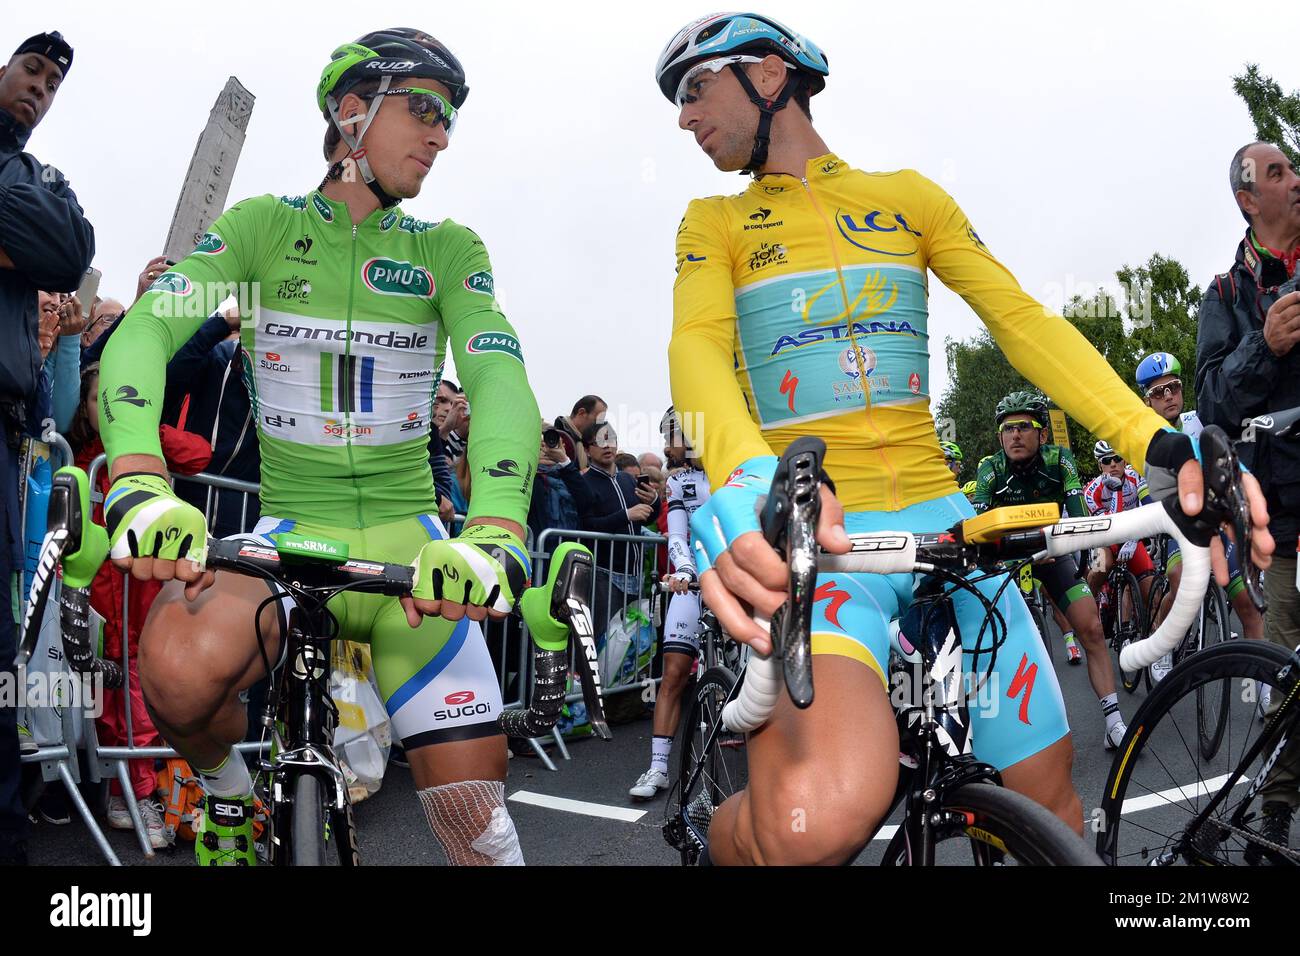 Slovakian Peter Sagan of Cannondale Pro Cycling and Italian Vincenzo Nibali  of Astana Pro Team pictured at the start of stage 7 of the 101st edition of  the Tour de France cycling